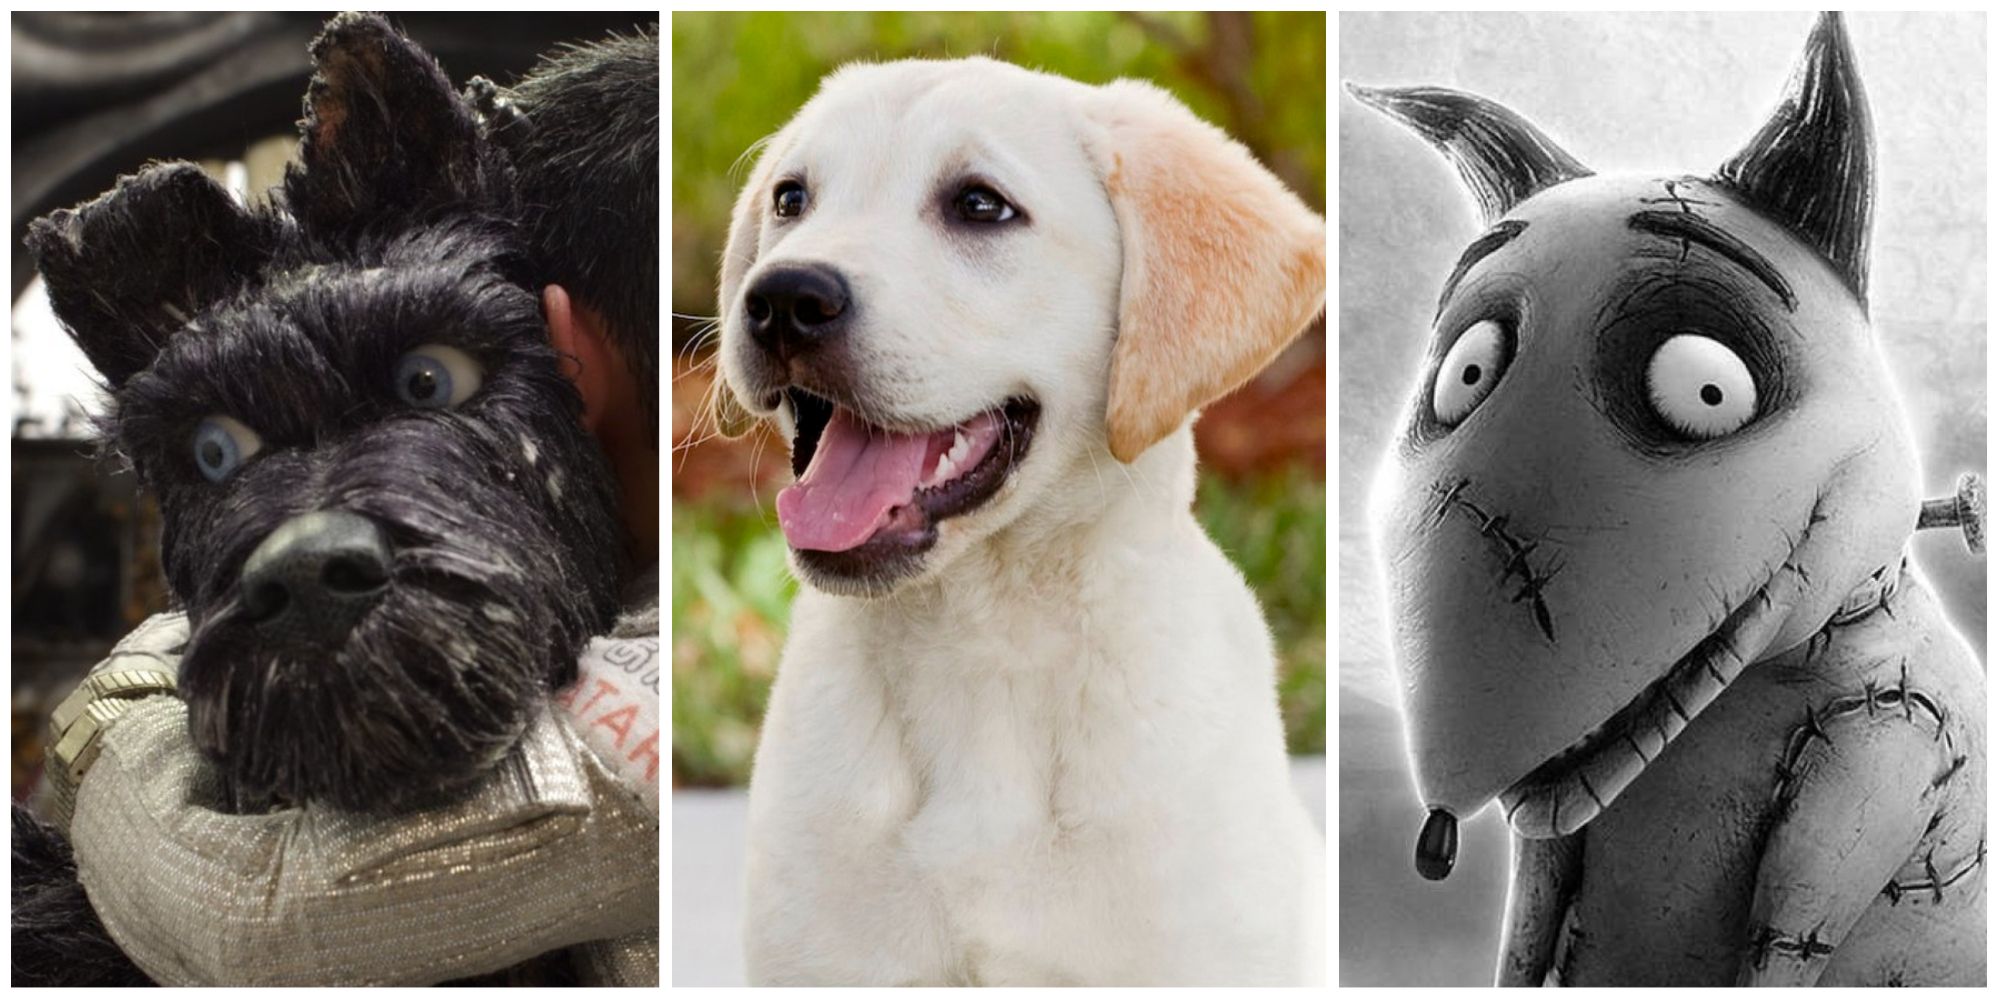 10 Iconic Movie Dogs. Isle of Dogs (left), Marley and Me (center), and Frankenweenie (right)